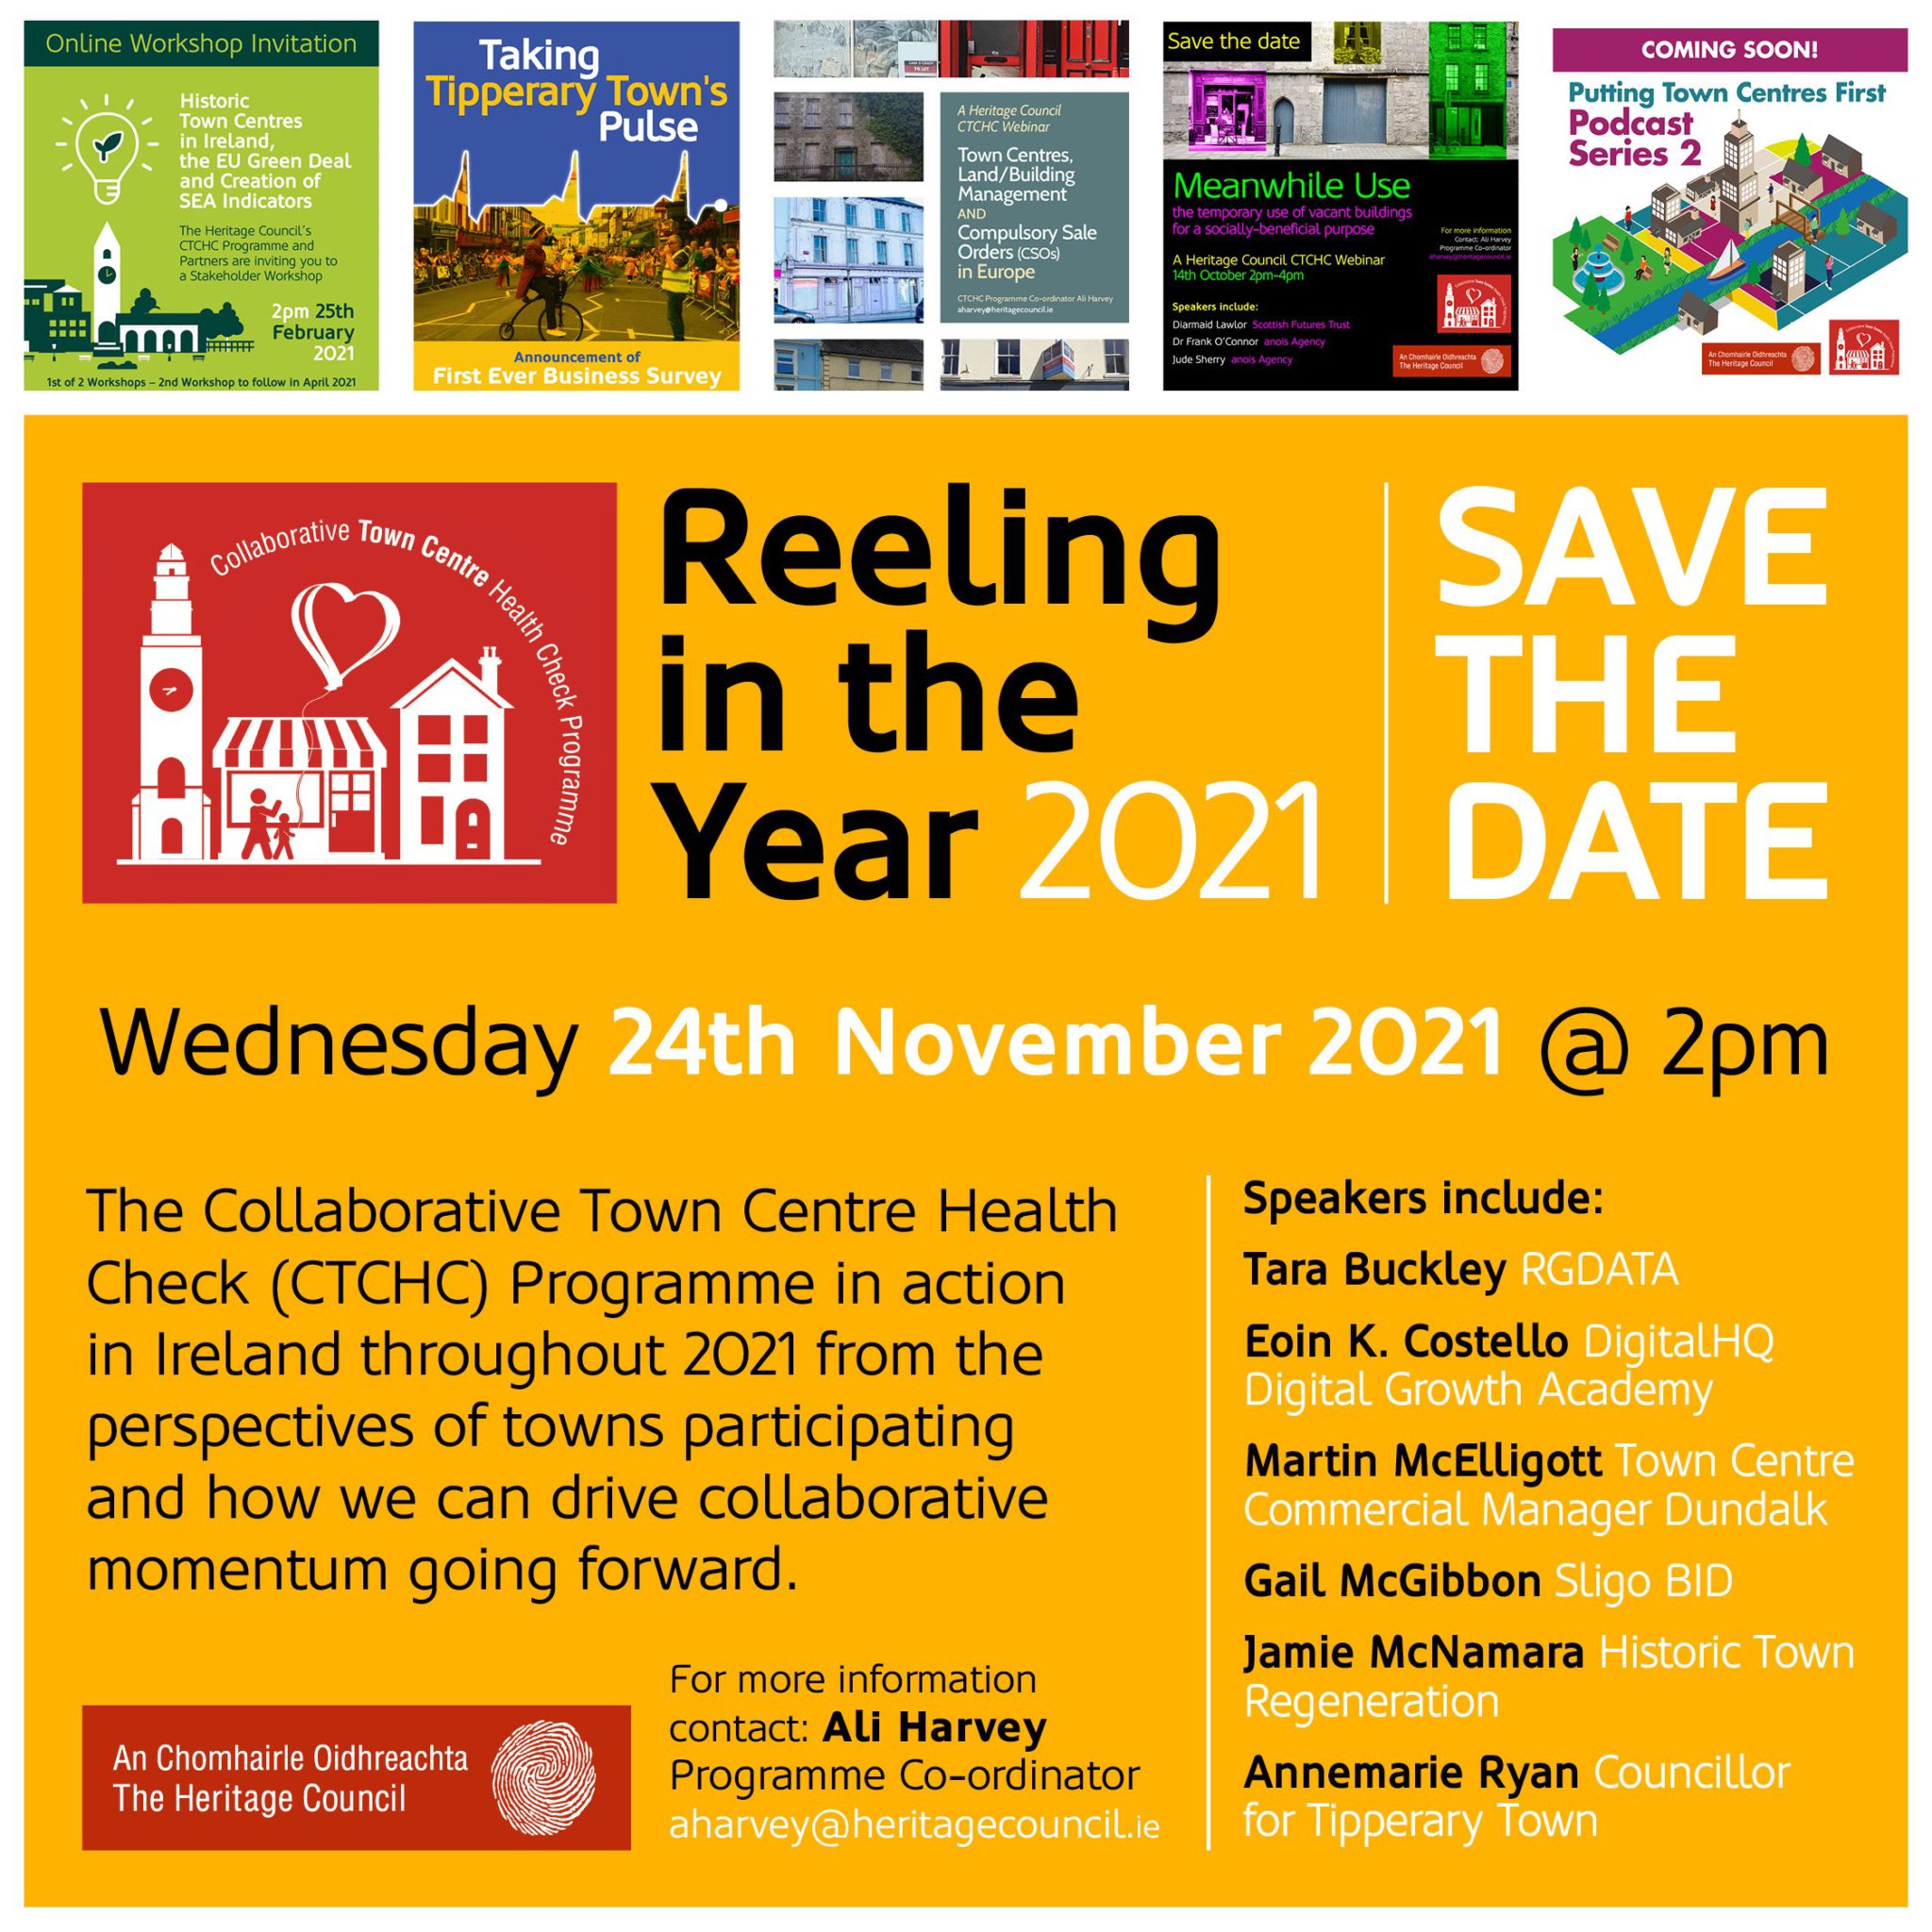 Reeling in the Year: Collaborative Town Centre Health Check Programme event